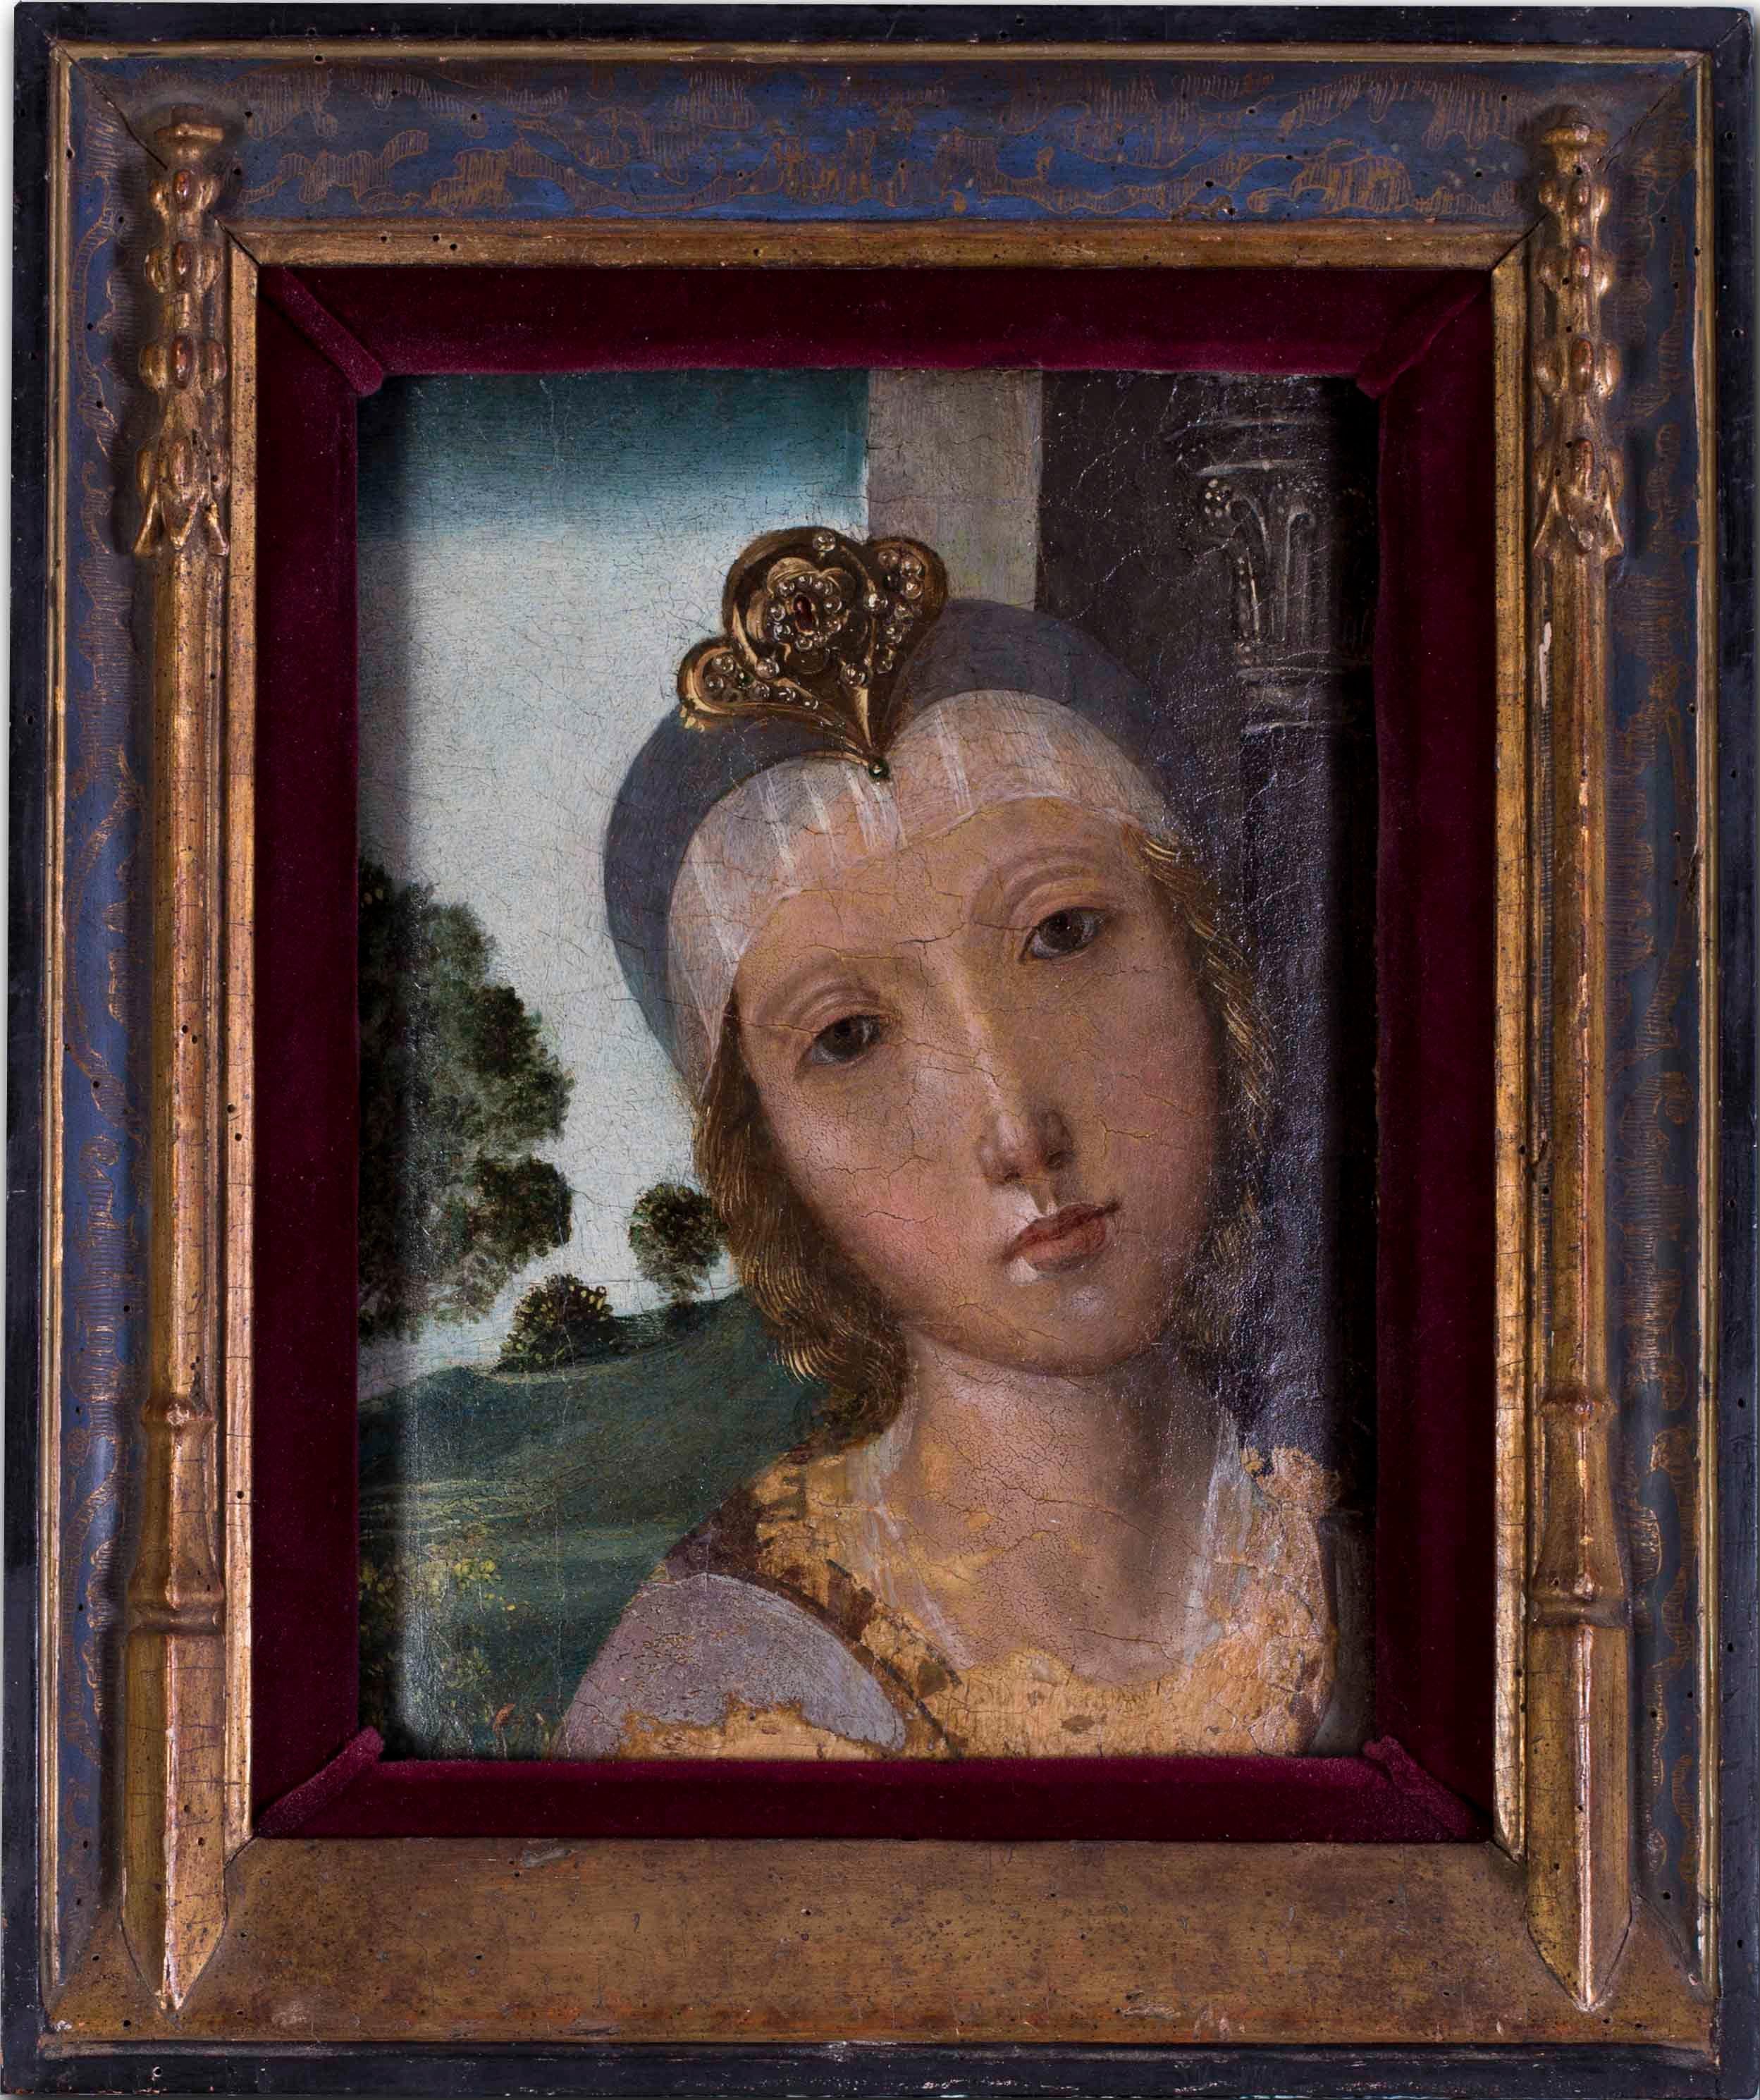 Unknown Portrait Painting - Italian Old Master portrait in the manner of Botticelli, oil on panel